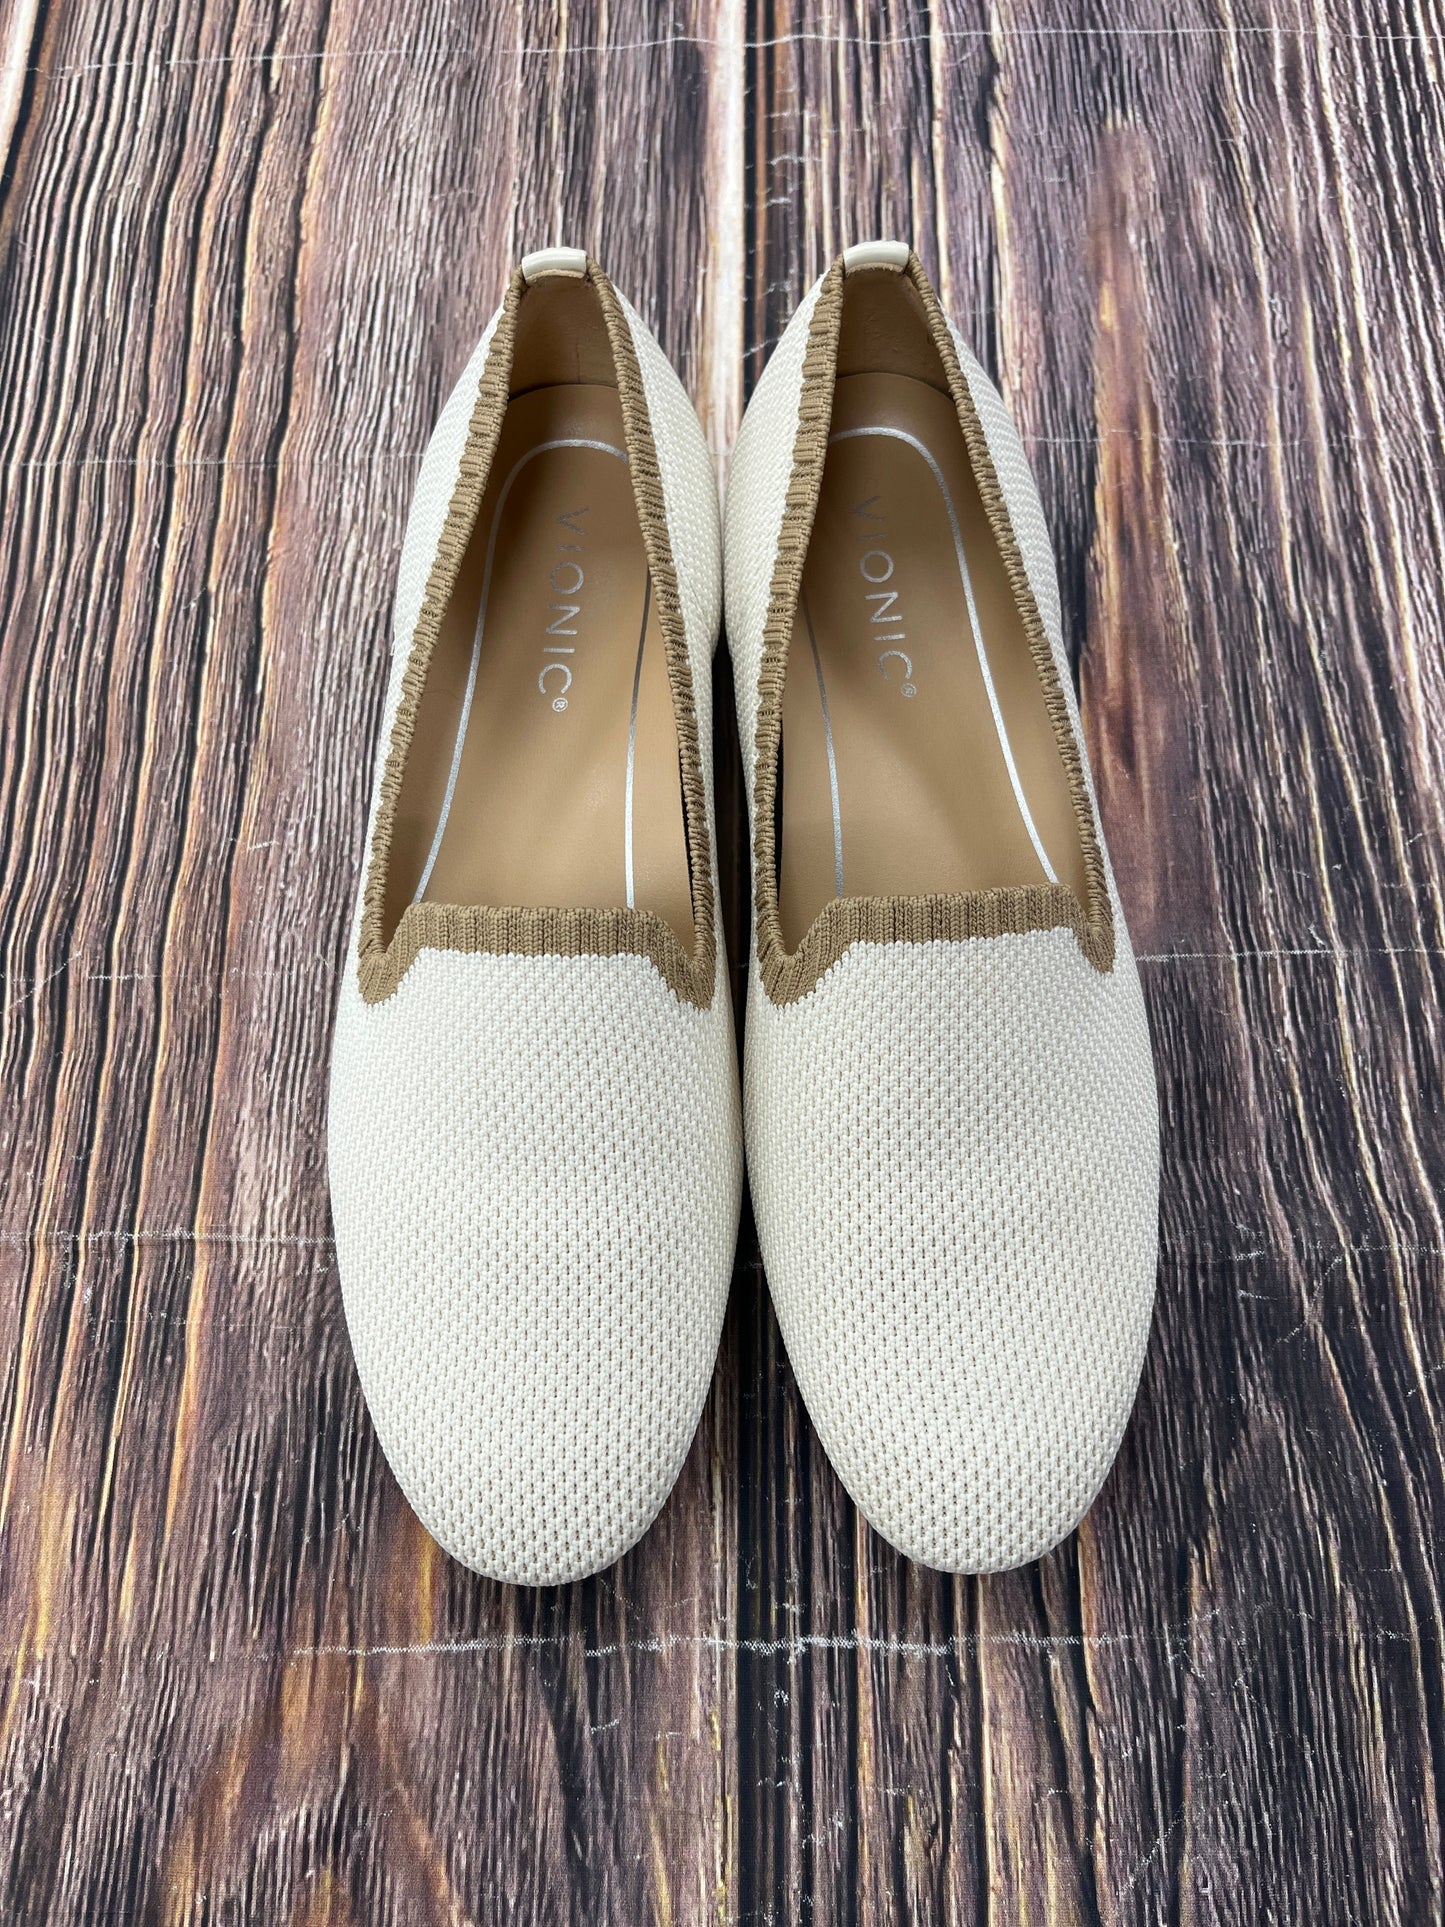 Shoes Flats Loafer Oxford By Vionic  Size: 8.5